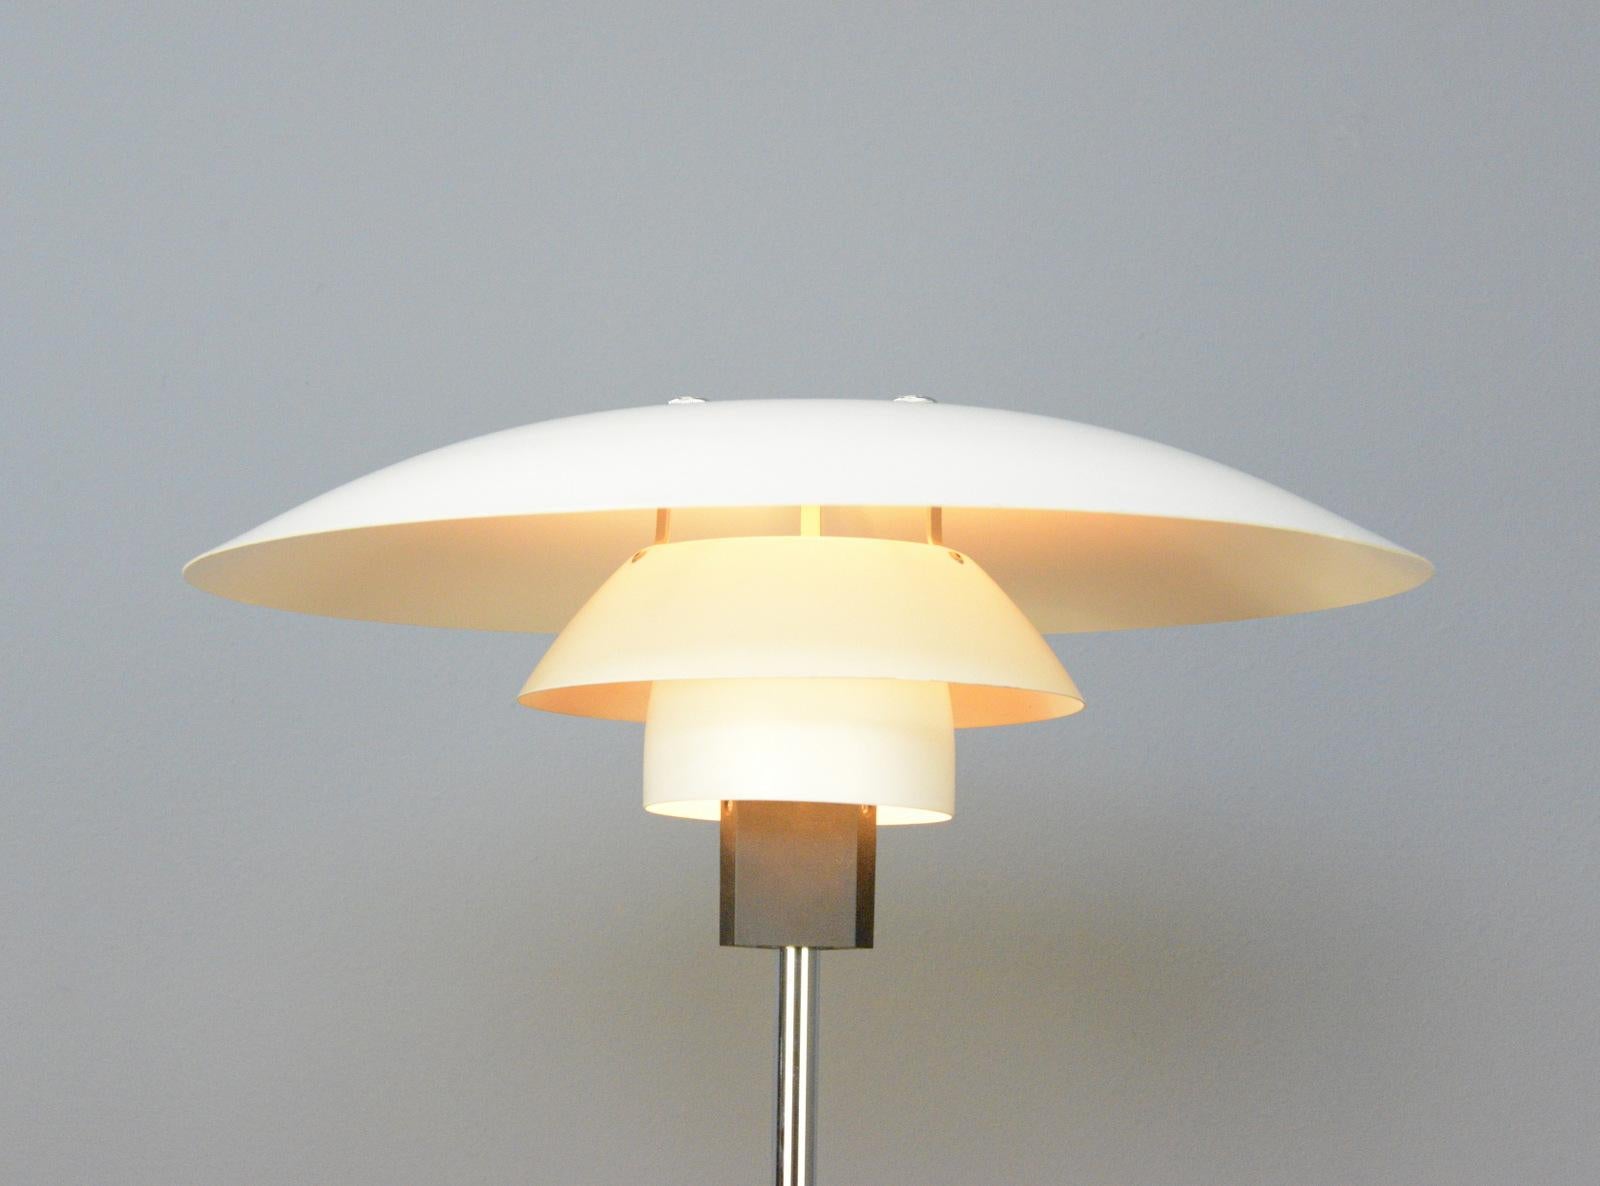 Model 4/3 table lamp by Louis Poulsen Circa 1960s.

- Chromed steel base and stem
- On/Off switch on the base
- Stepped steel shade
- Takes E27 fitting bulbs
- Designed by Poul Henningsen
- Produced by Louis Poulsen
- Danish ~ 1960s
- 45cm